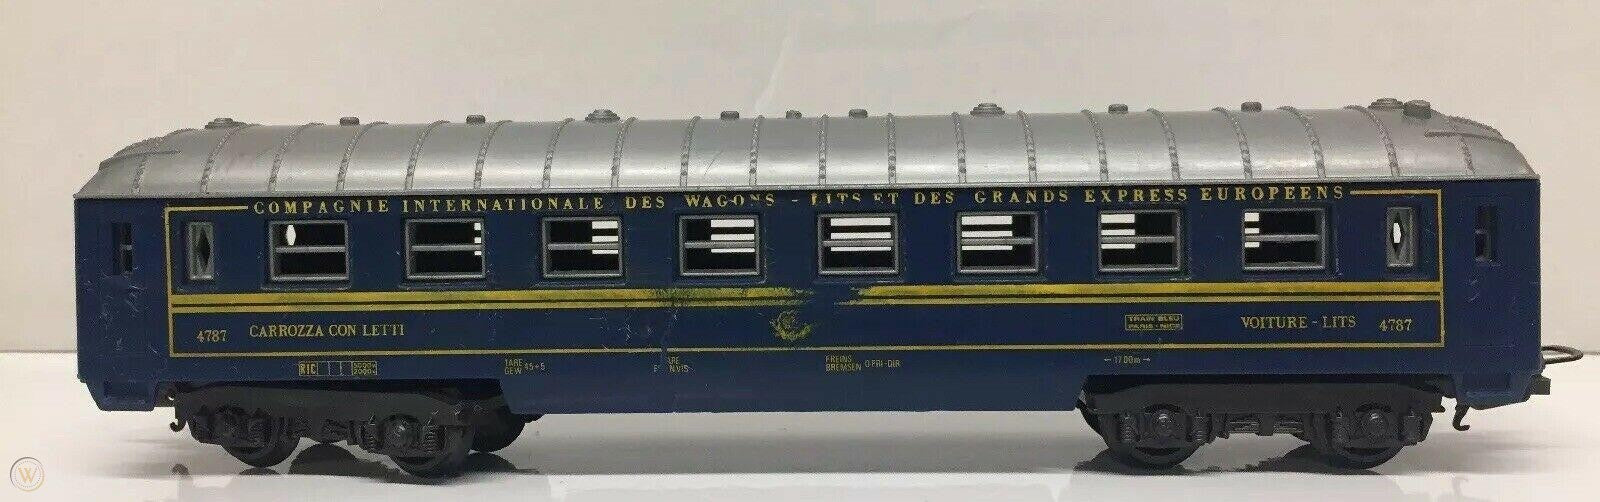 Ho Scale 4787 Carozza Con Letti Voiture Lits Passenger Car - Qualty Pre Owned